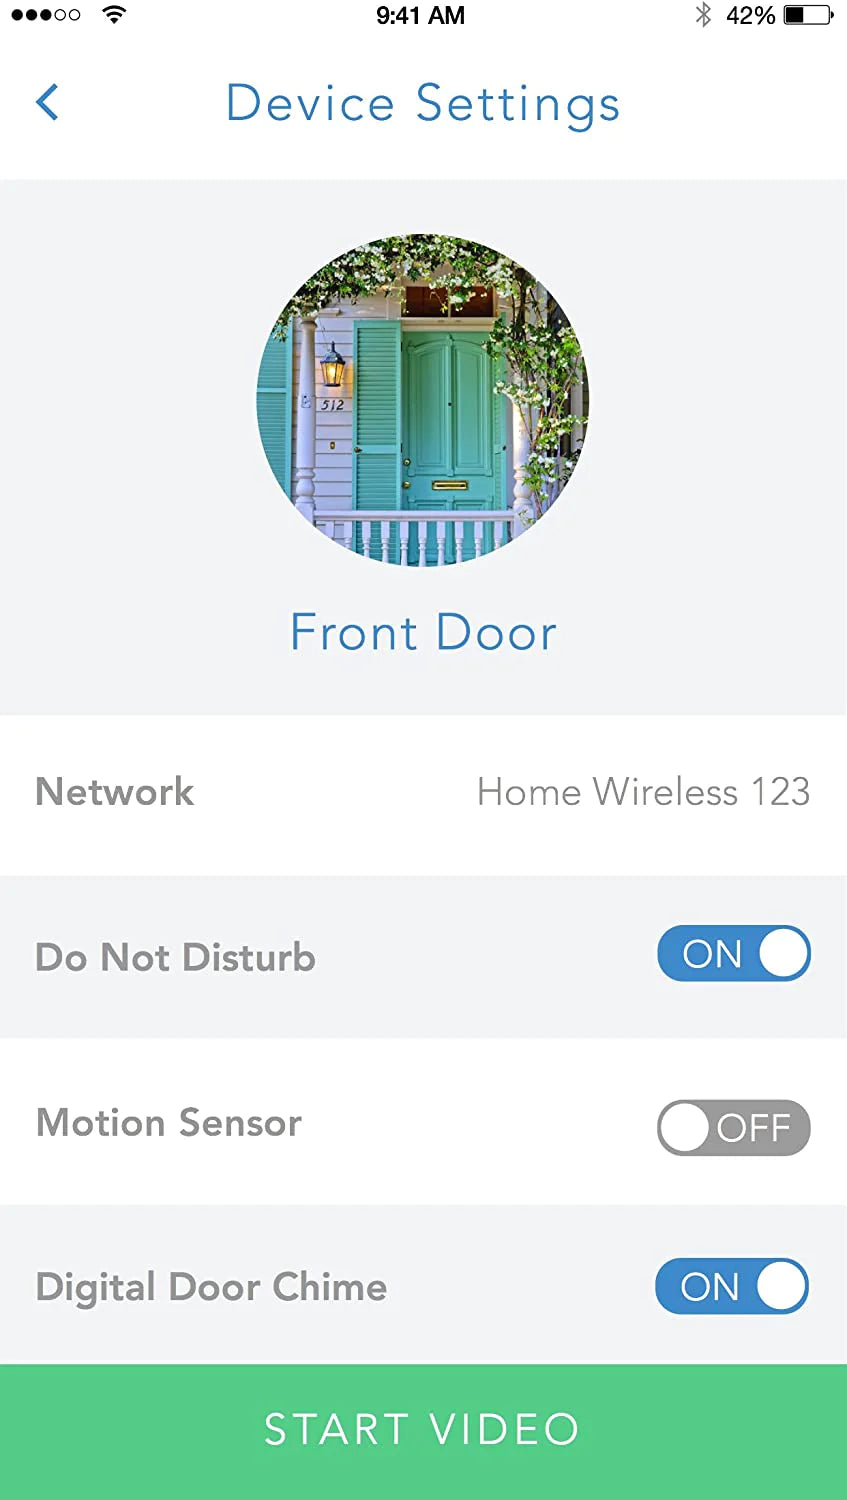 SkyBell Wi-Fi Video Doorbell Version 2.0 Classic | Silver